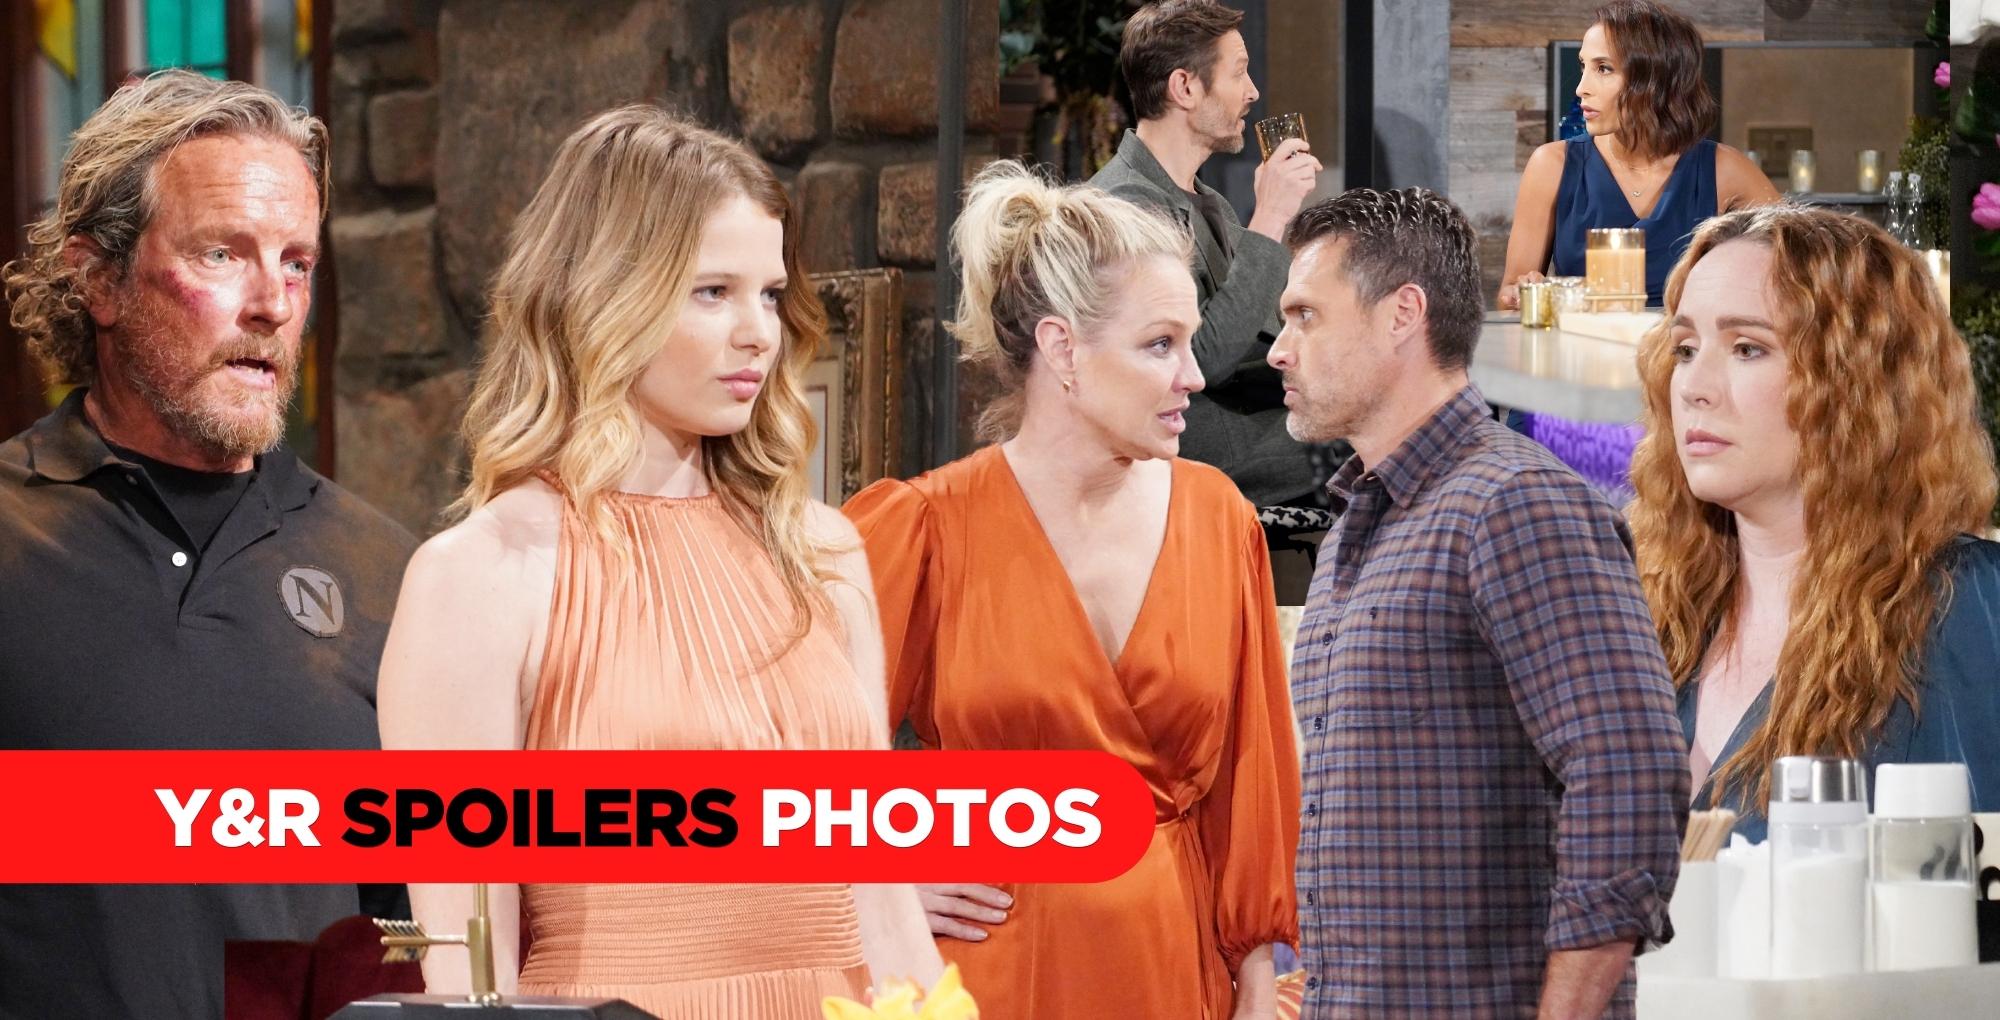 y&r spoilers photos collage for wednesday, june 14.